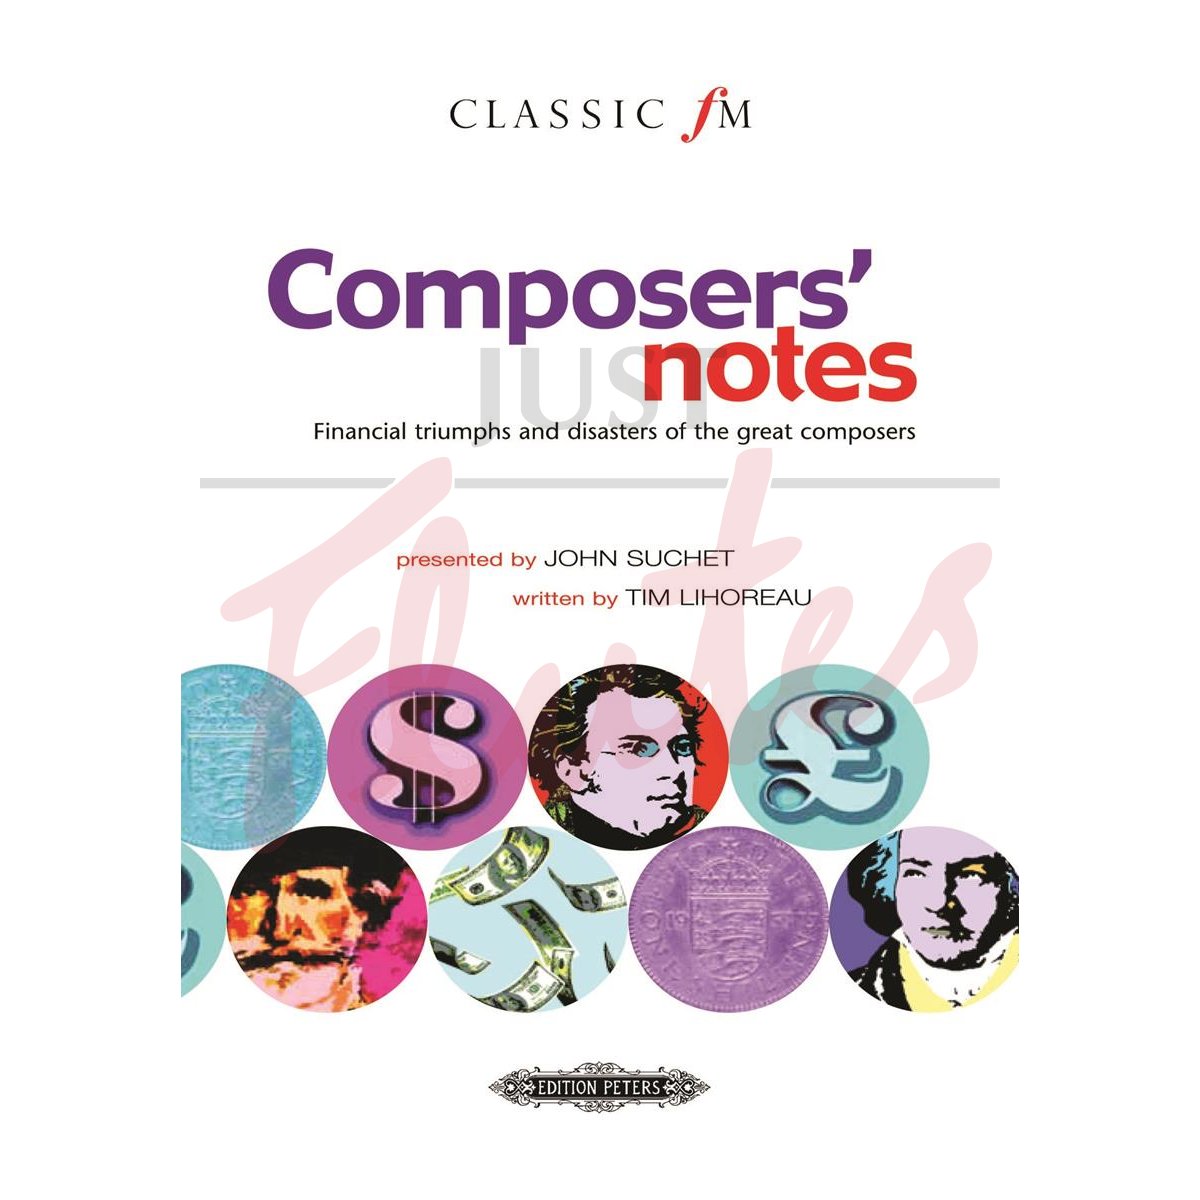 Classic FM - Composers' Notes